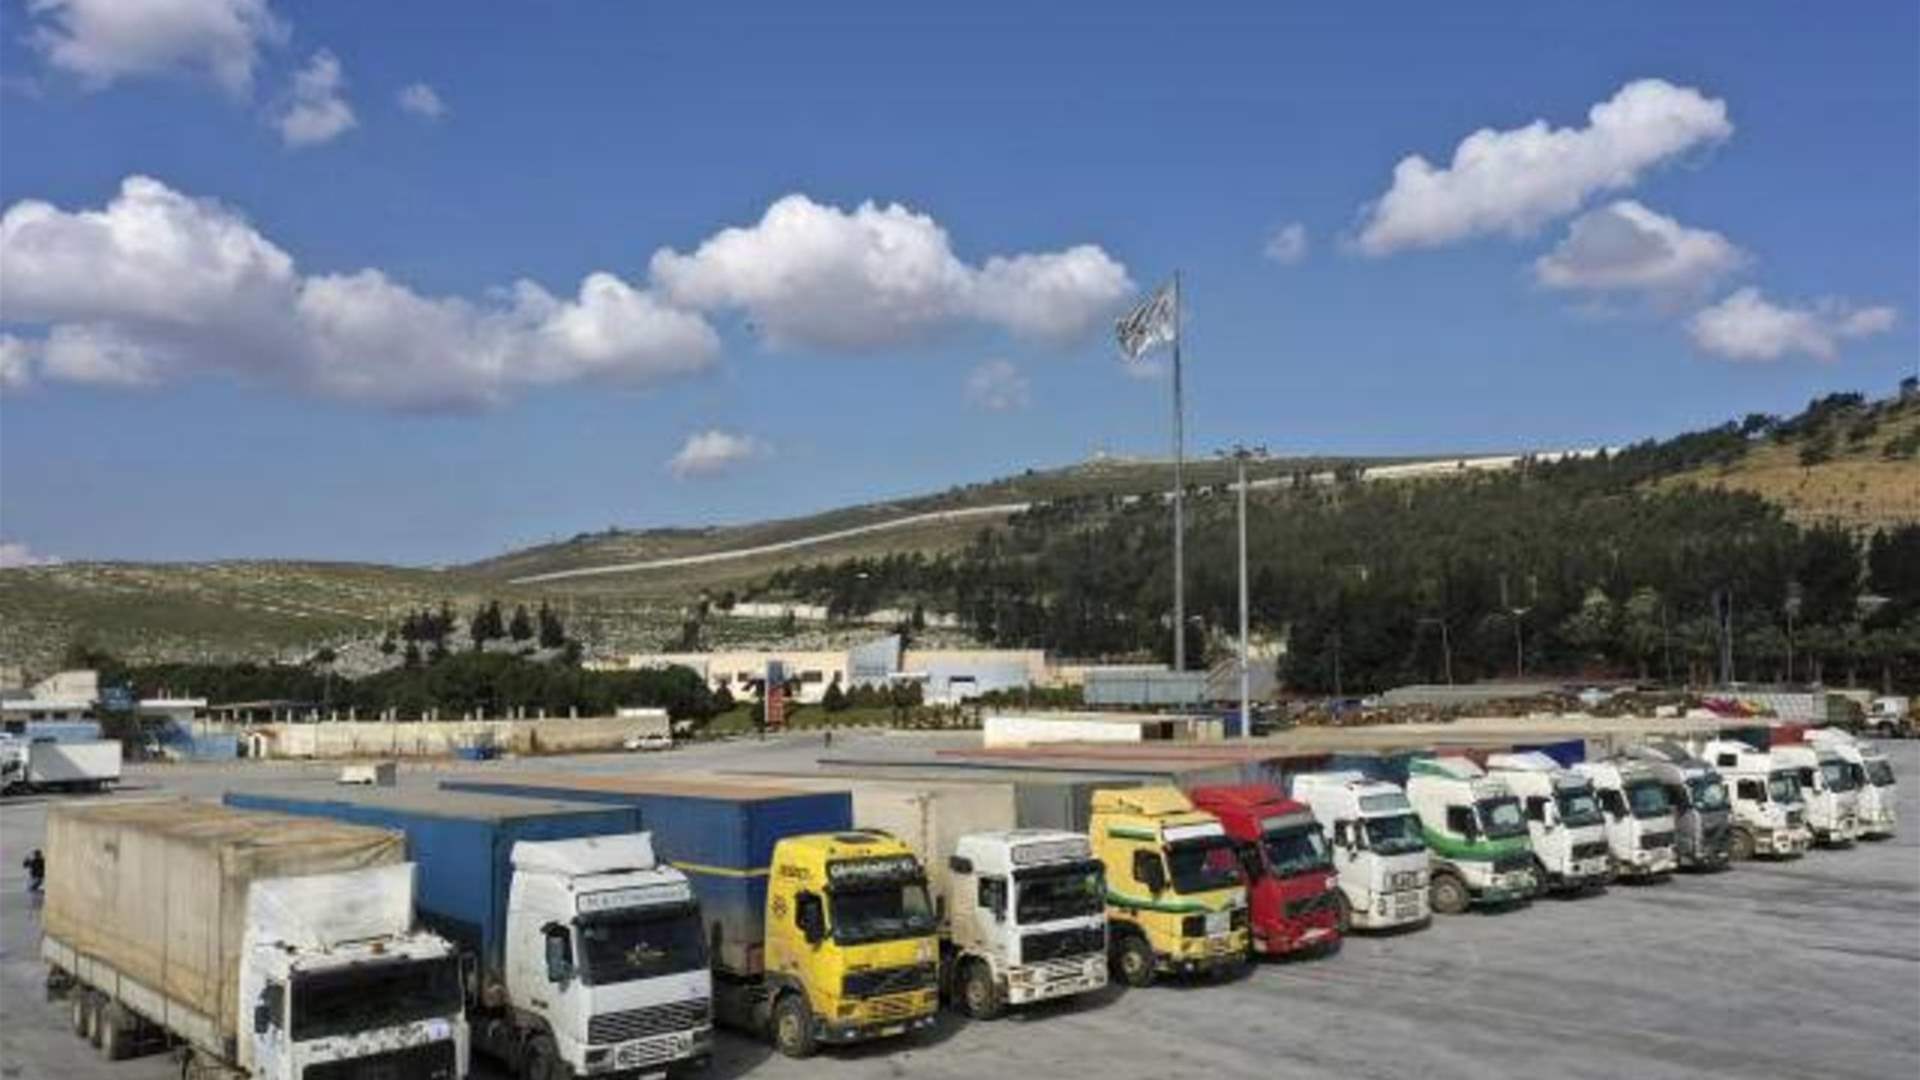 Syria allows UN to use major aid crossing towards opposition control areas